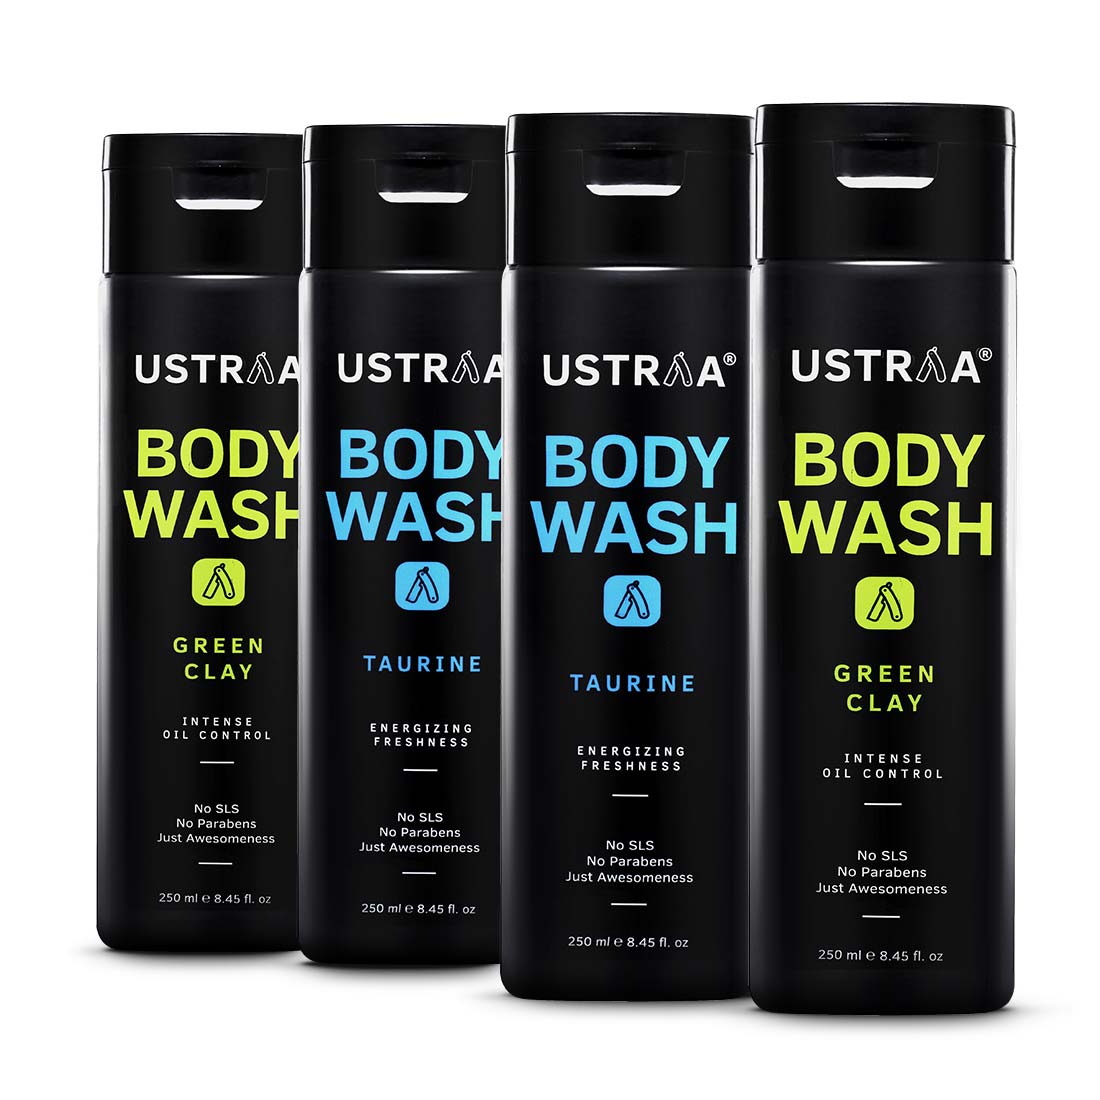 Body Wash For Men – Green Clay & Taurine – Set of 4